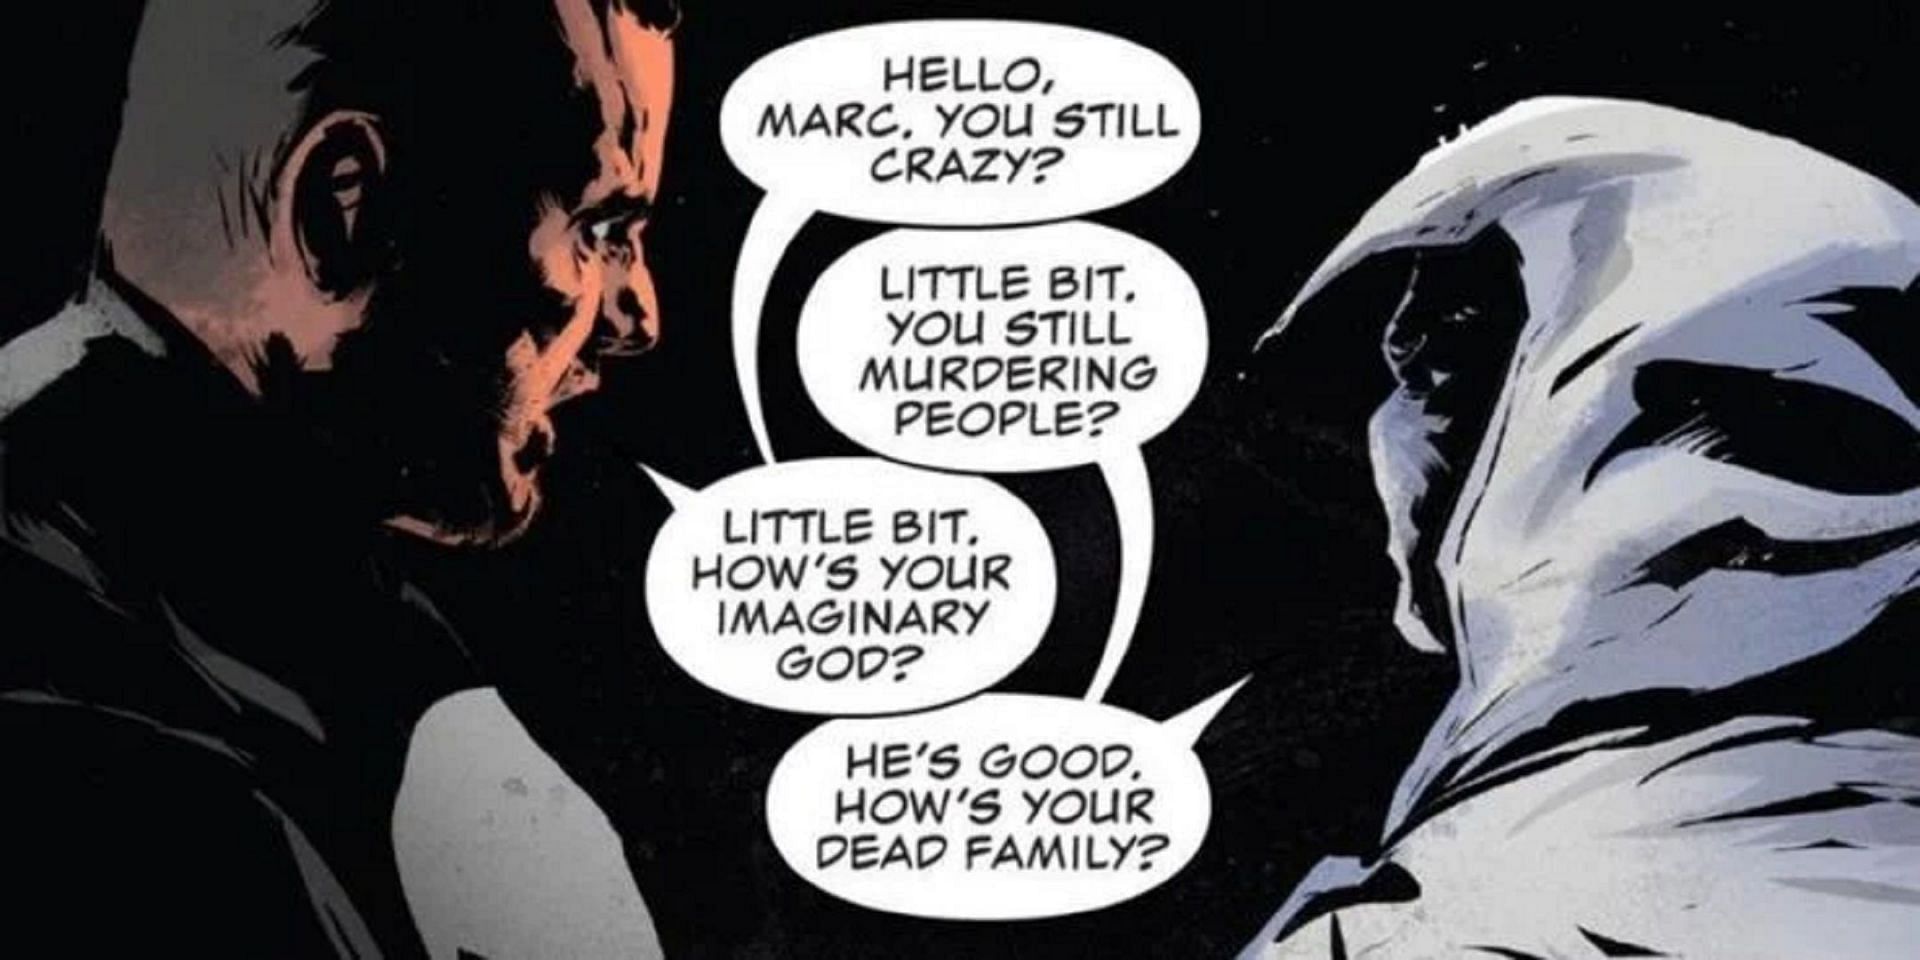 The meme is a conversation between Moon Knight and the Punisher (Image via Marvel)